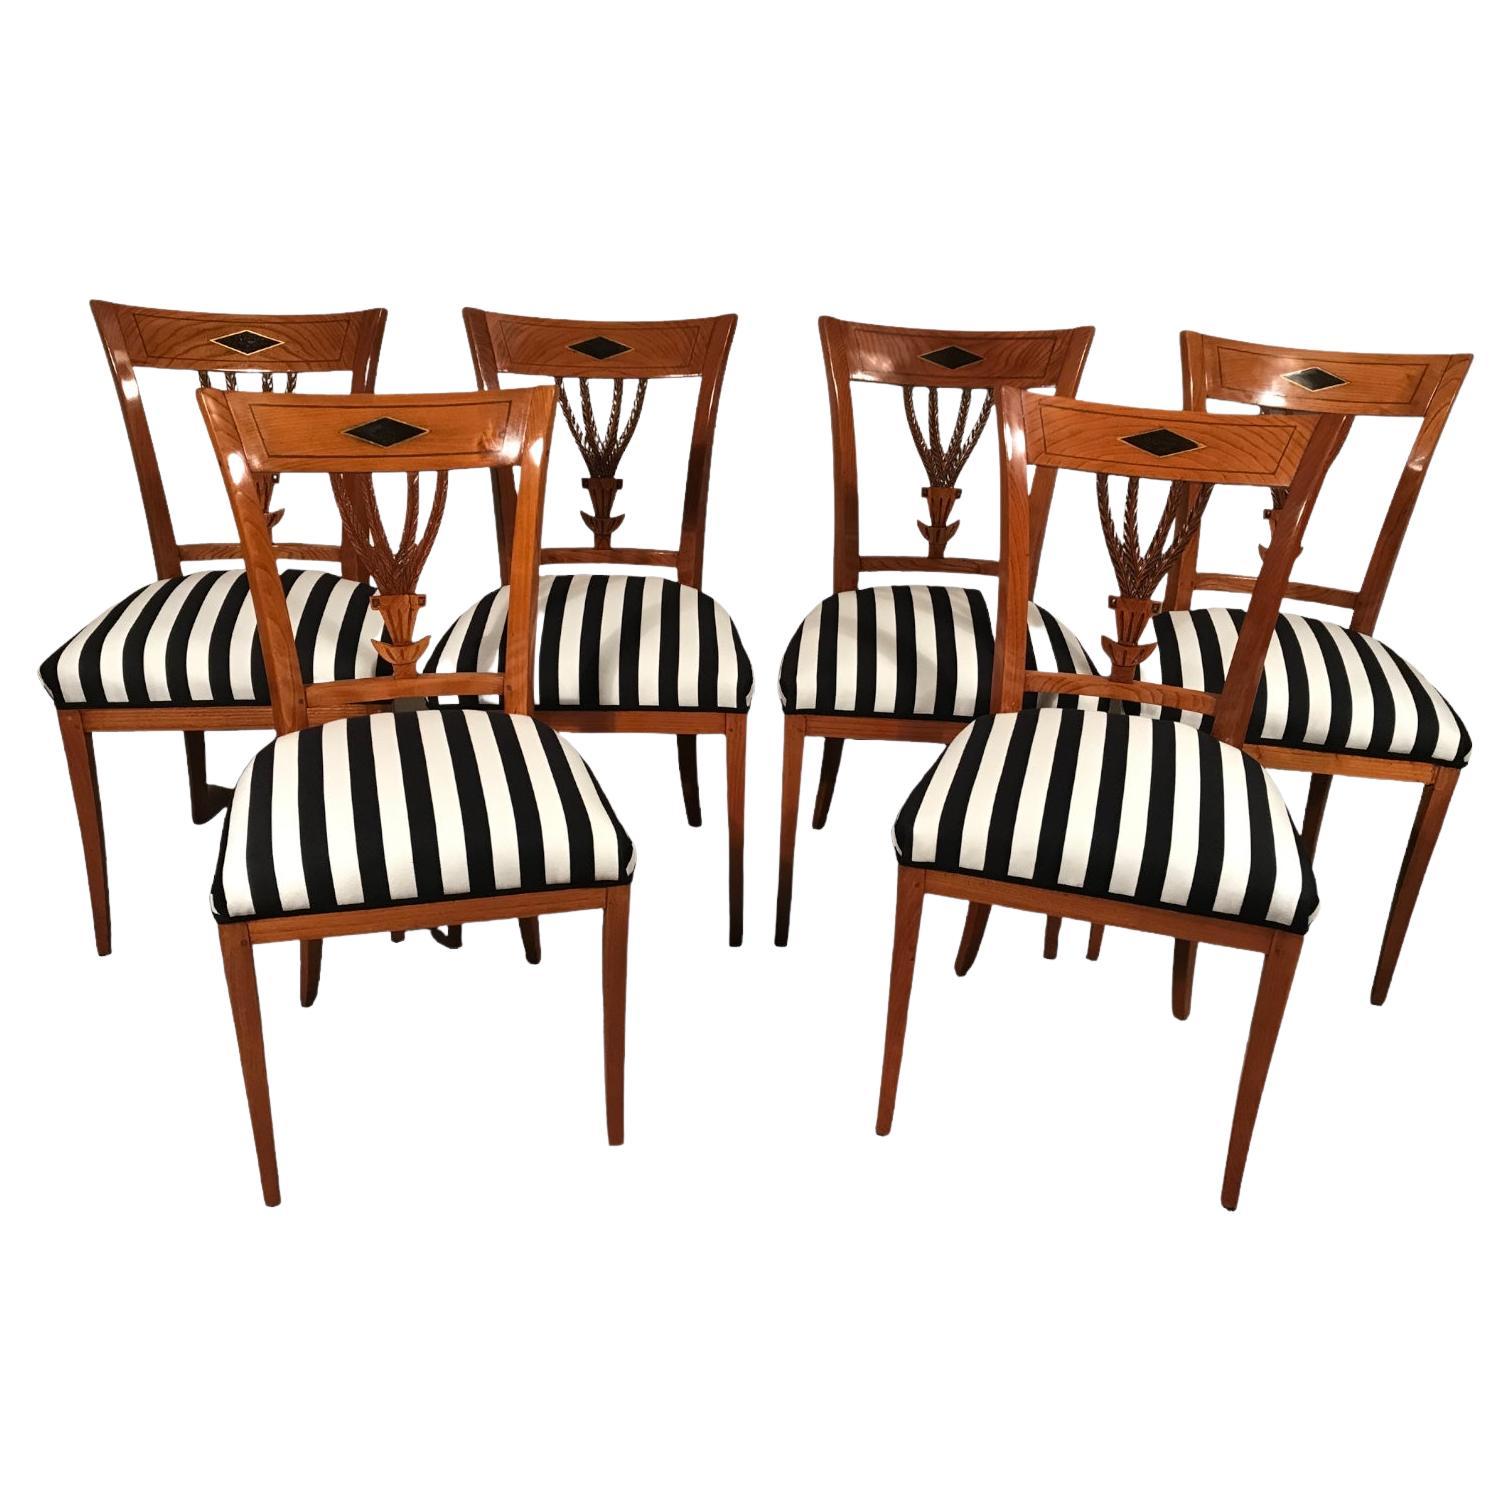 Set of six Neoclassical Dining Room Chairs, Germany 1810-30